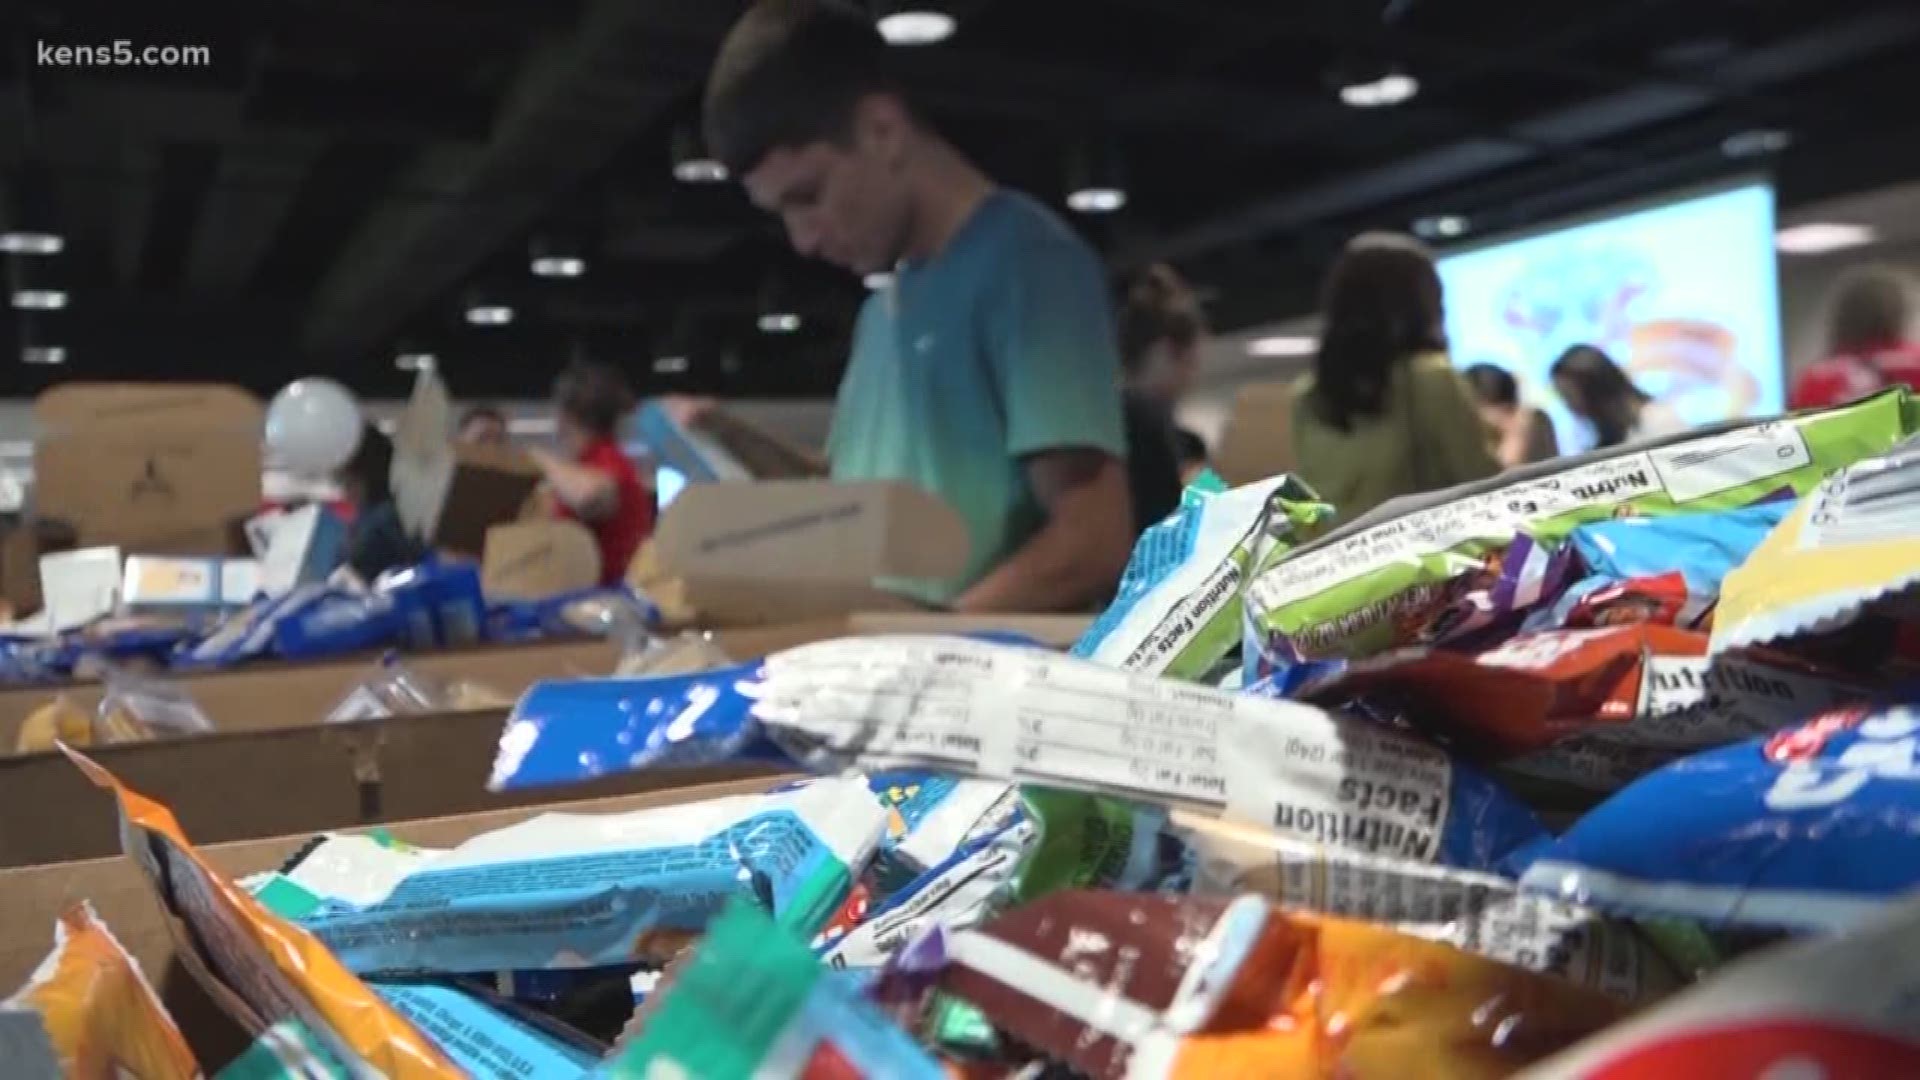 The nonprofit group Soldiers' Angels is celebrating its 15th anniversary. In order to celebrate, the group decided to pack 15,000 care packages in 15 hours for current and former military members.